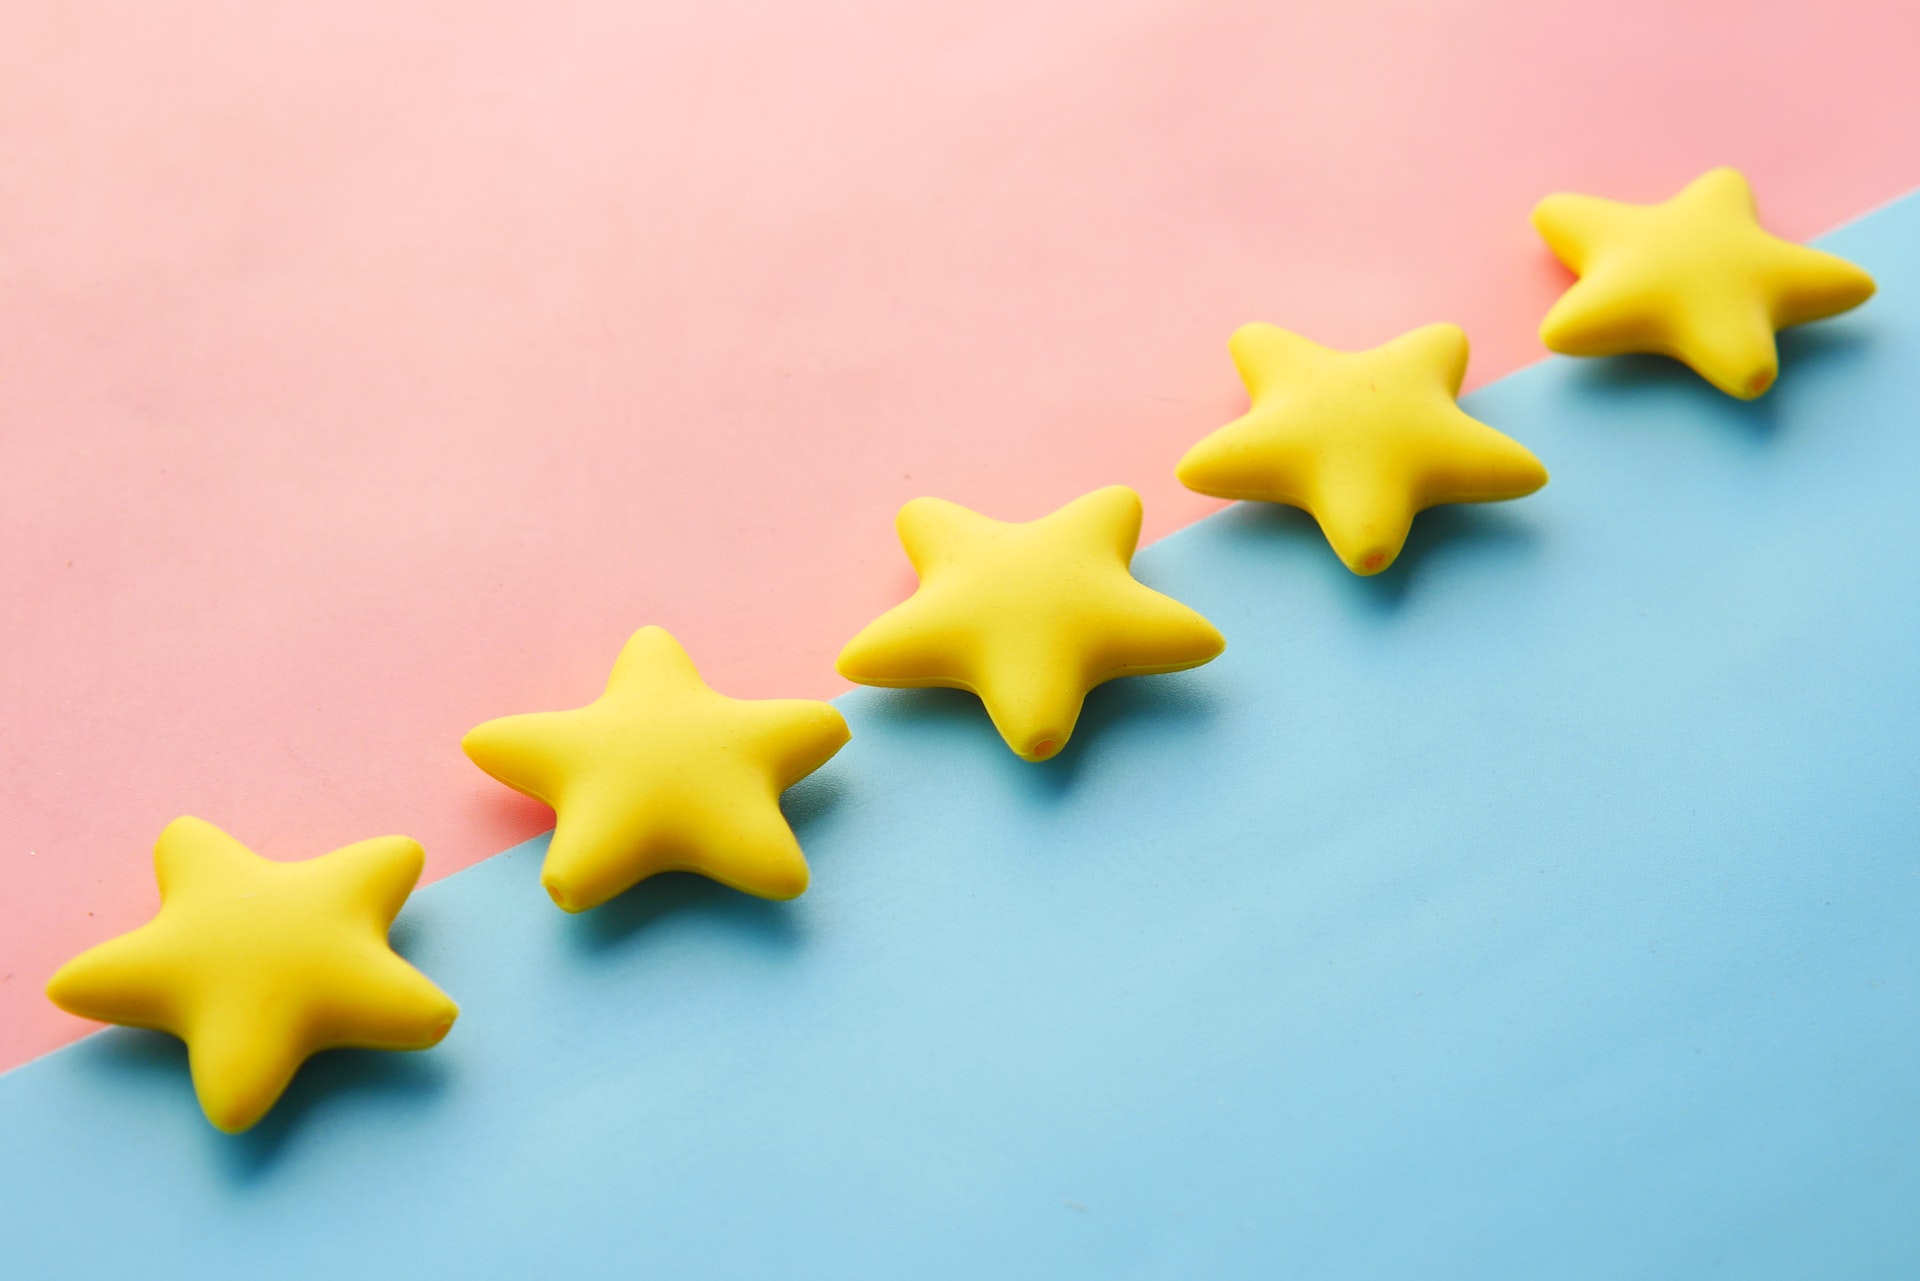 3-D stars on a pink and blue background